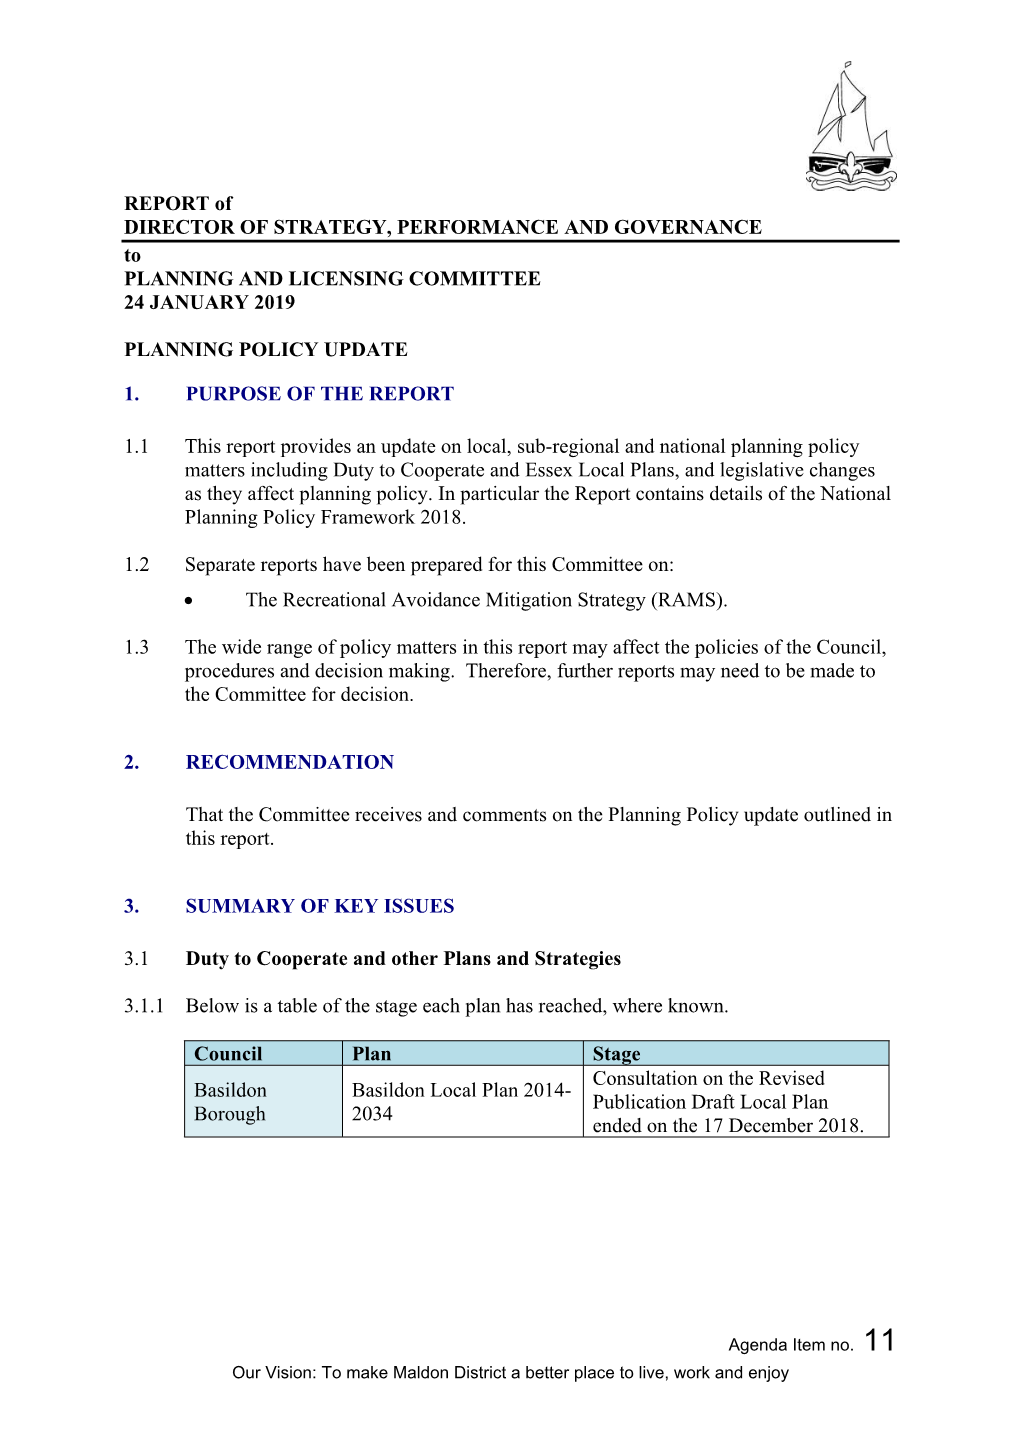 REPORT of DIRECTOR of STRATEGY, PERFORMANCE and GOVERNANCE to PLANNING and LICENSING COMMITTEE 24 JANUARY 2019